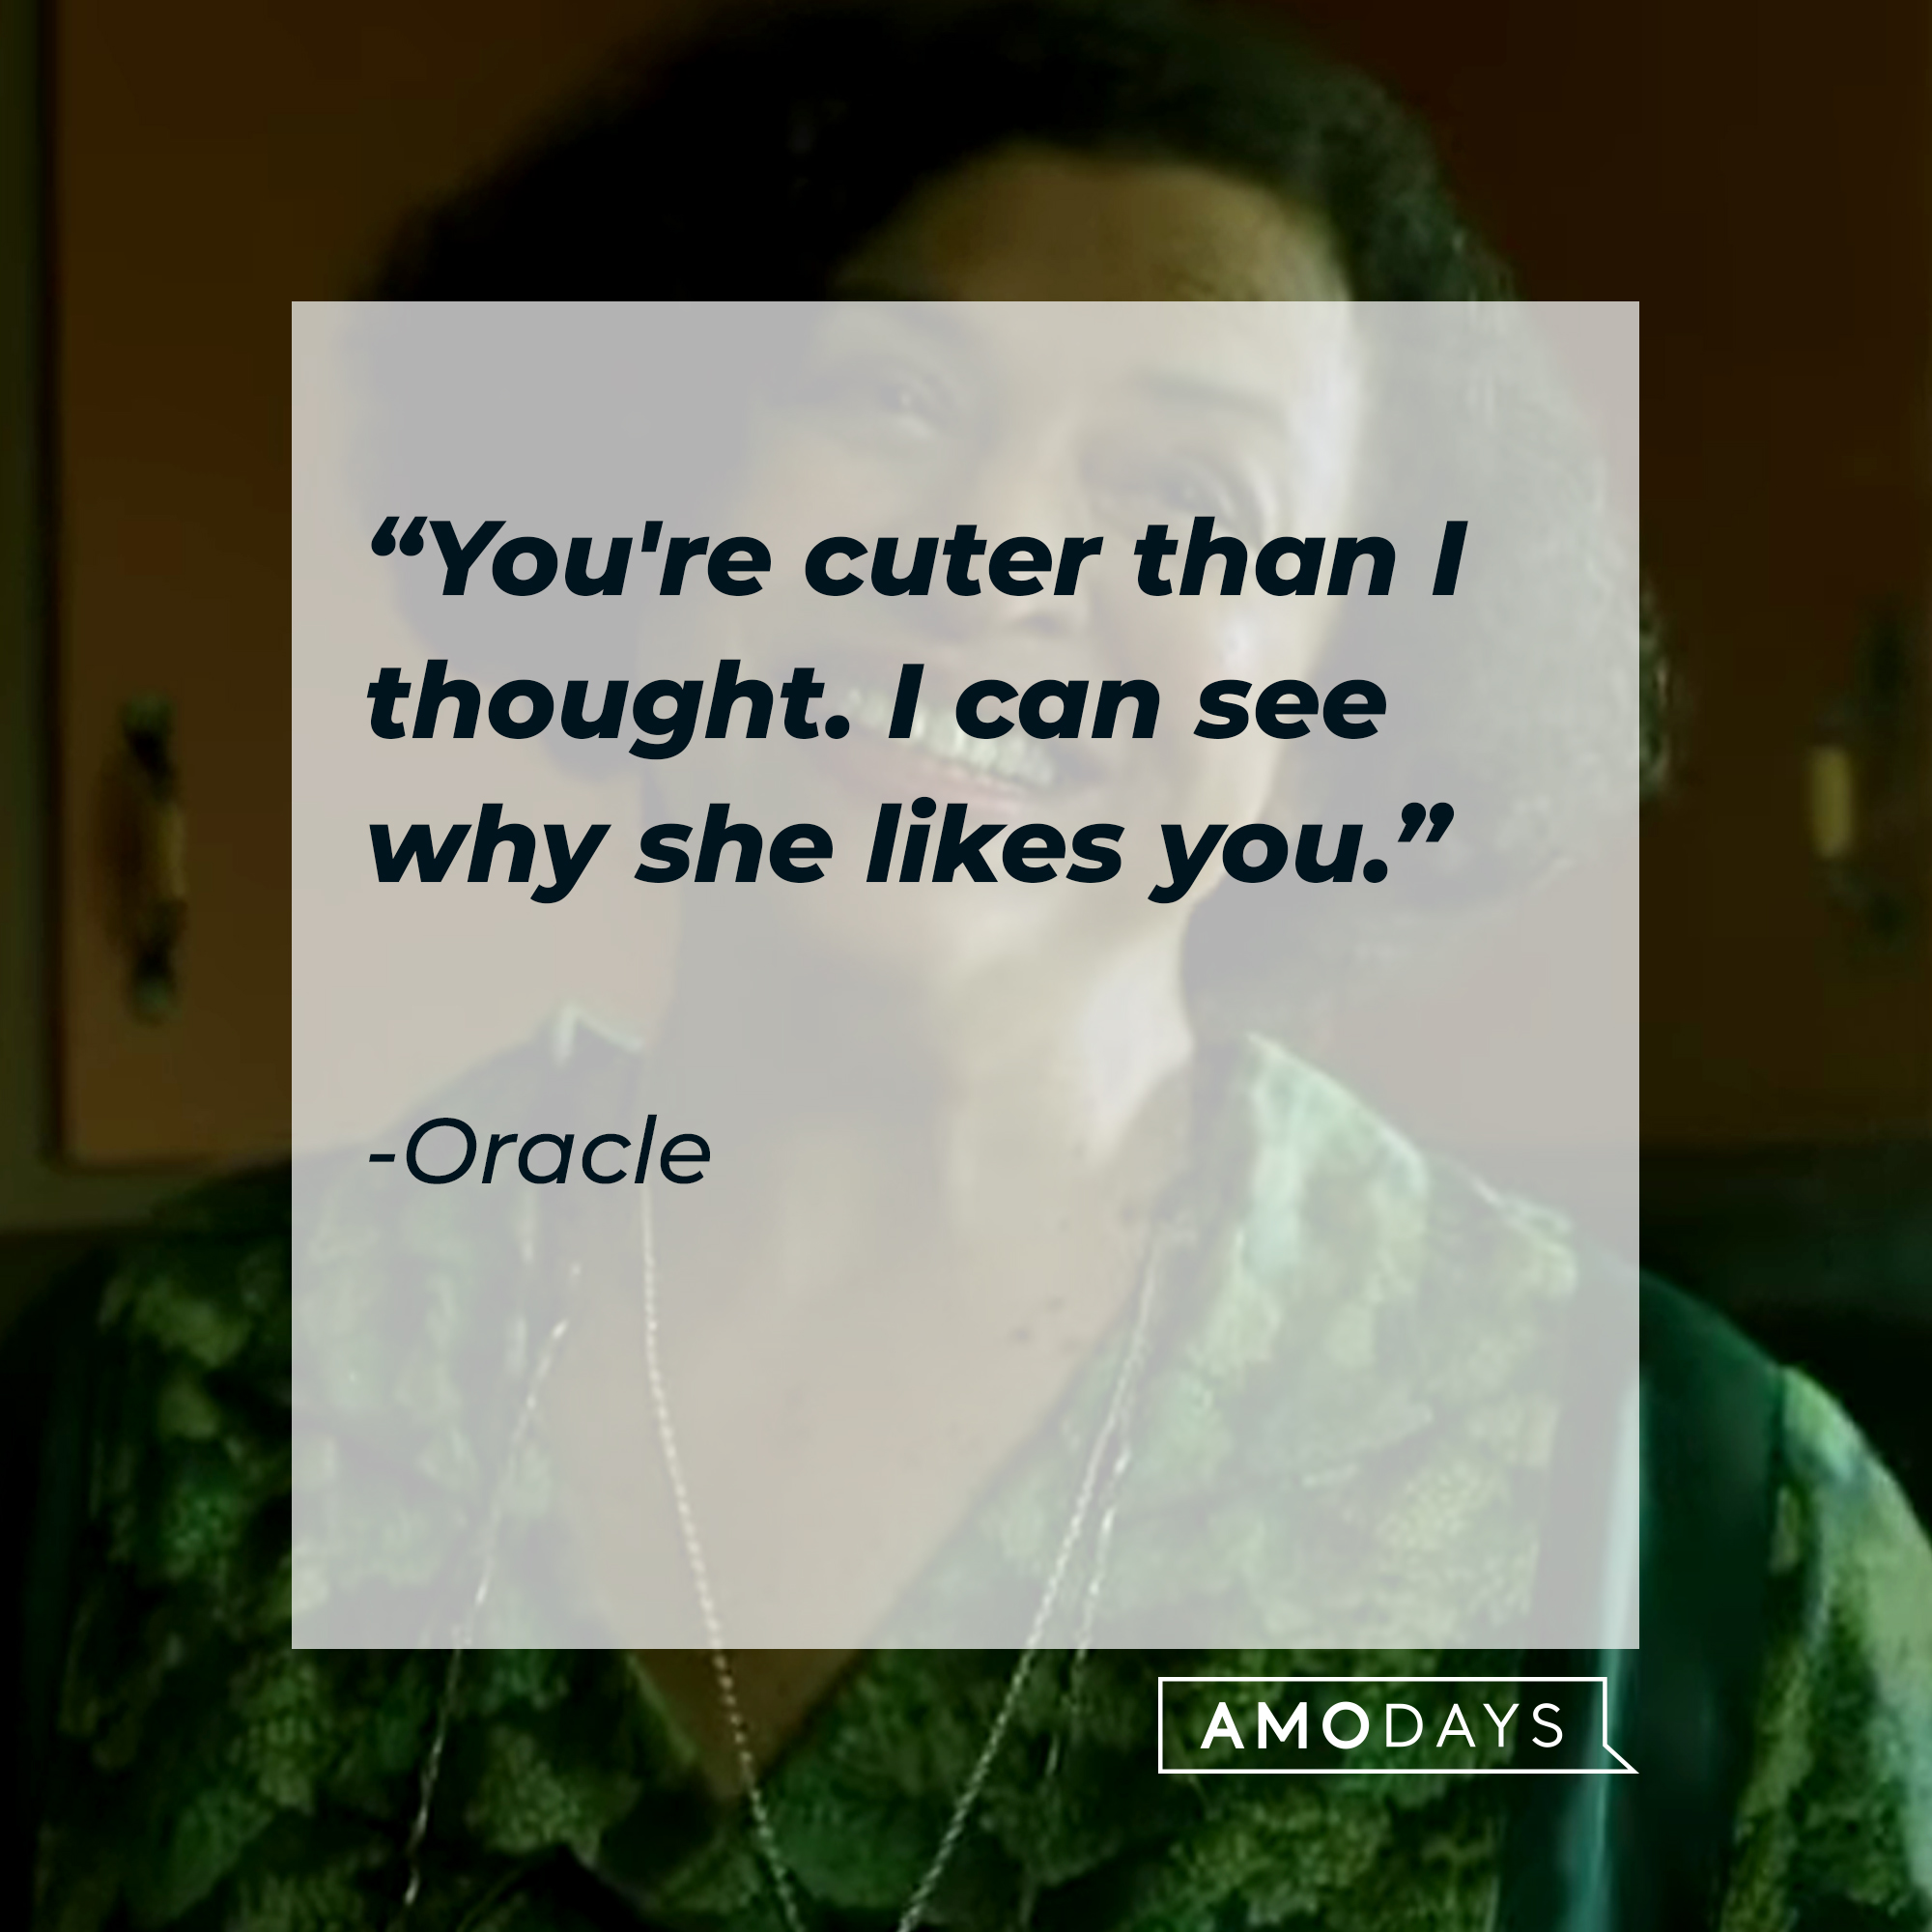 Oracle's quote: “You're cuter than I thought. I can see why she likes you.” | Source: facebook.com/TheMatrixMovie